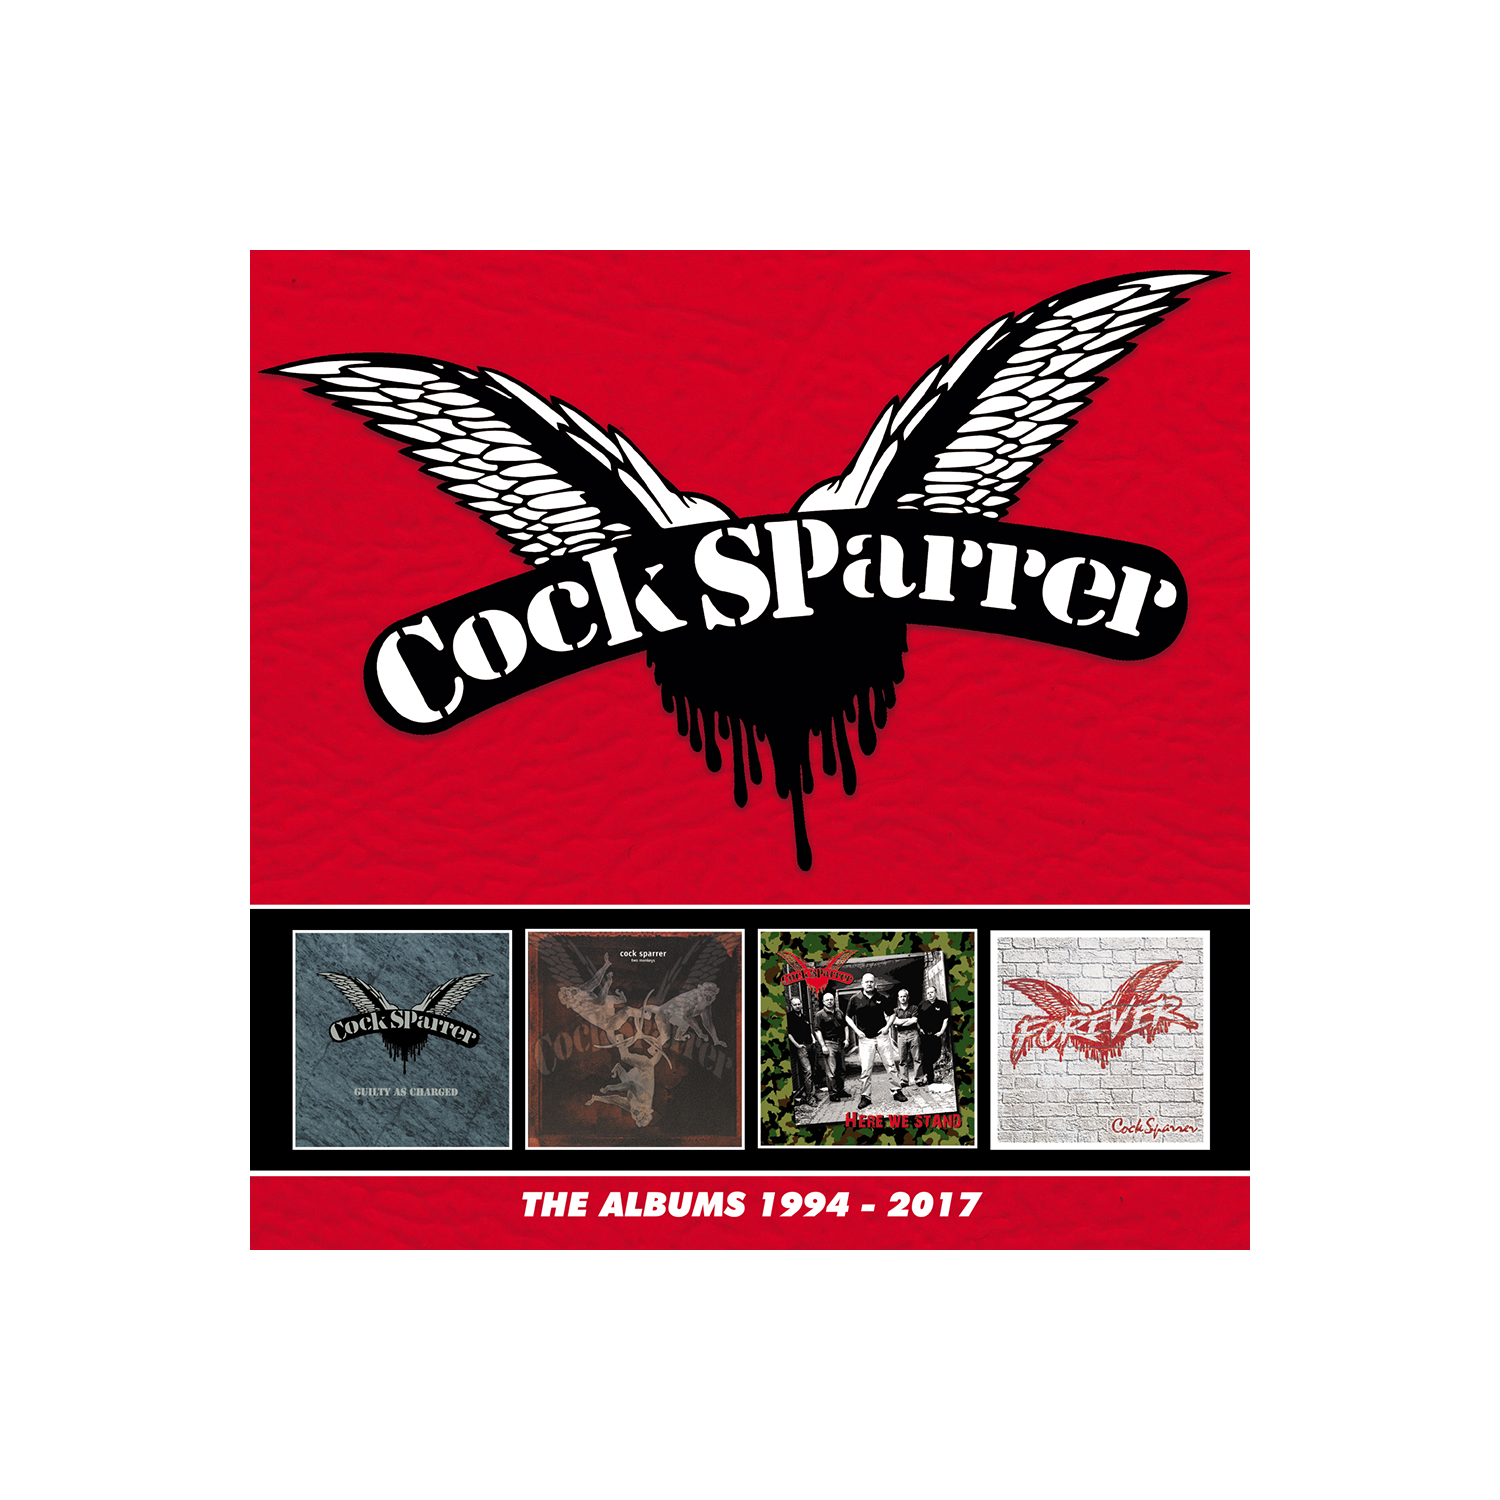 Cock Sparrer Embroidered Patch Punk Rock Oi Skins Street Punk England Belongs To